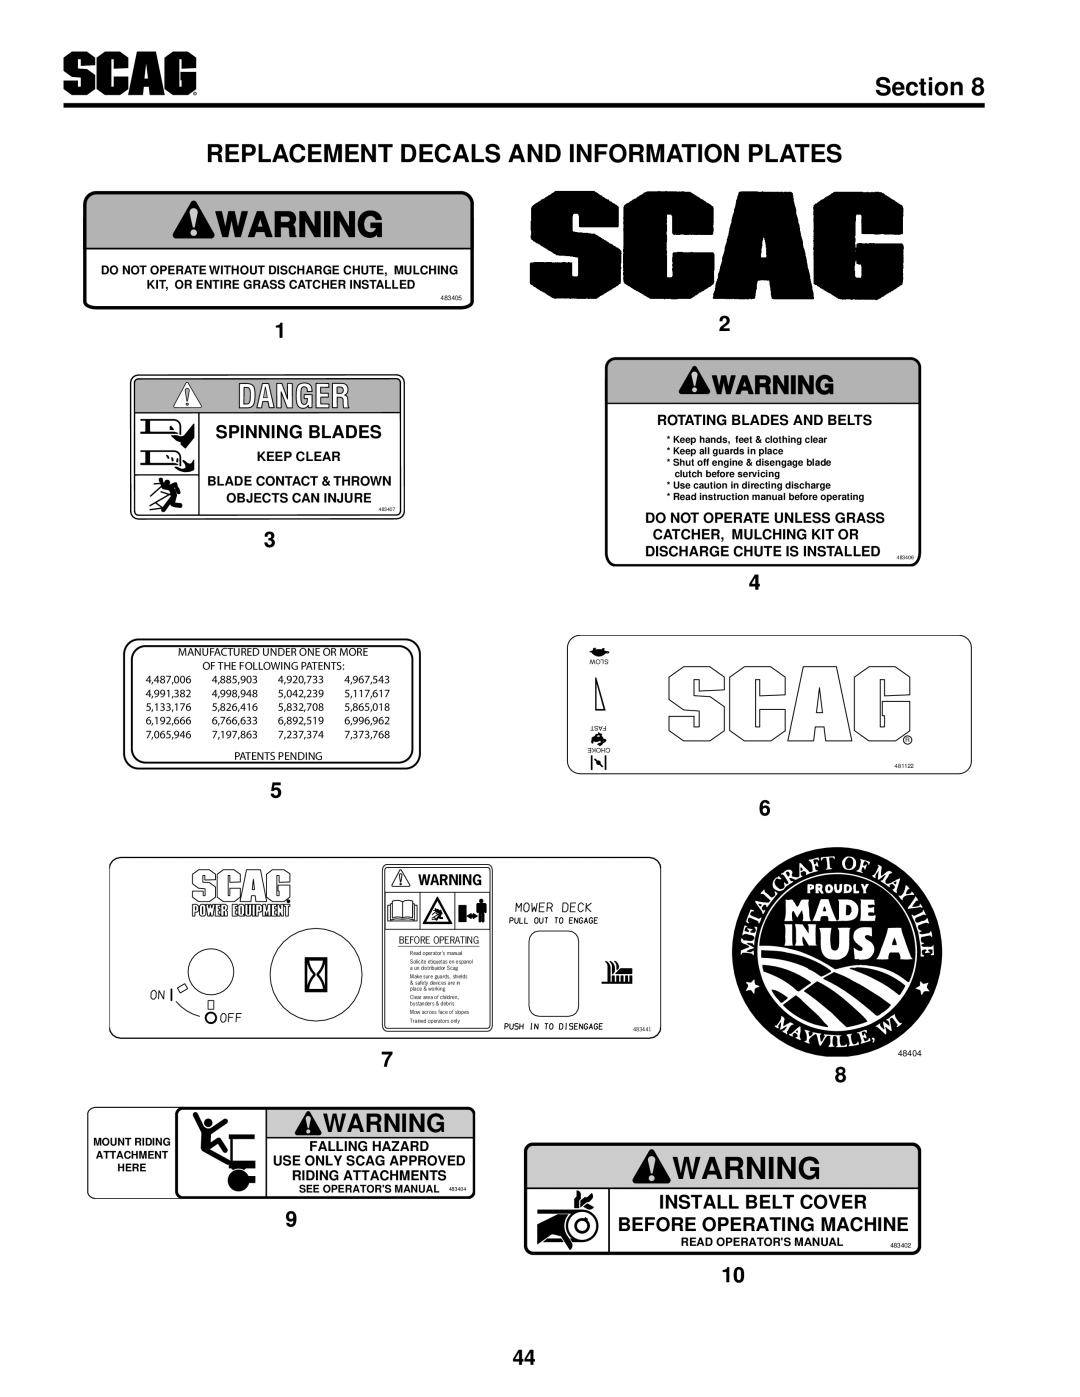 Scag Power Equipment SW36A-16KAI Replacement Decals And Information Plates, Section, Spinning Blades, Patents Pending 